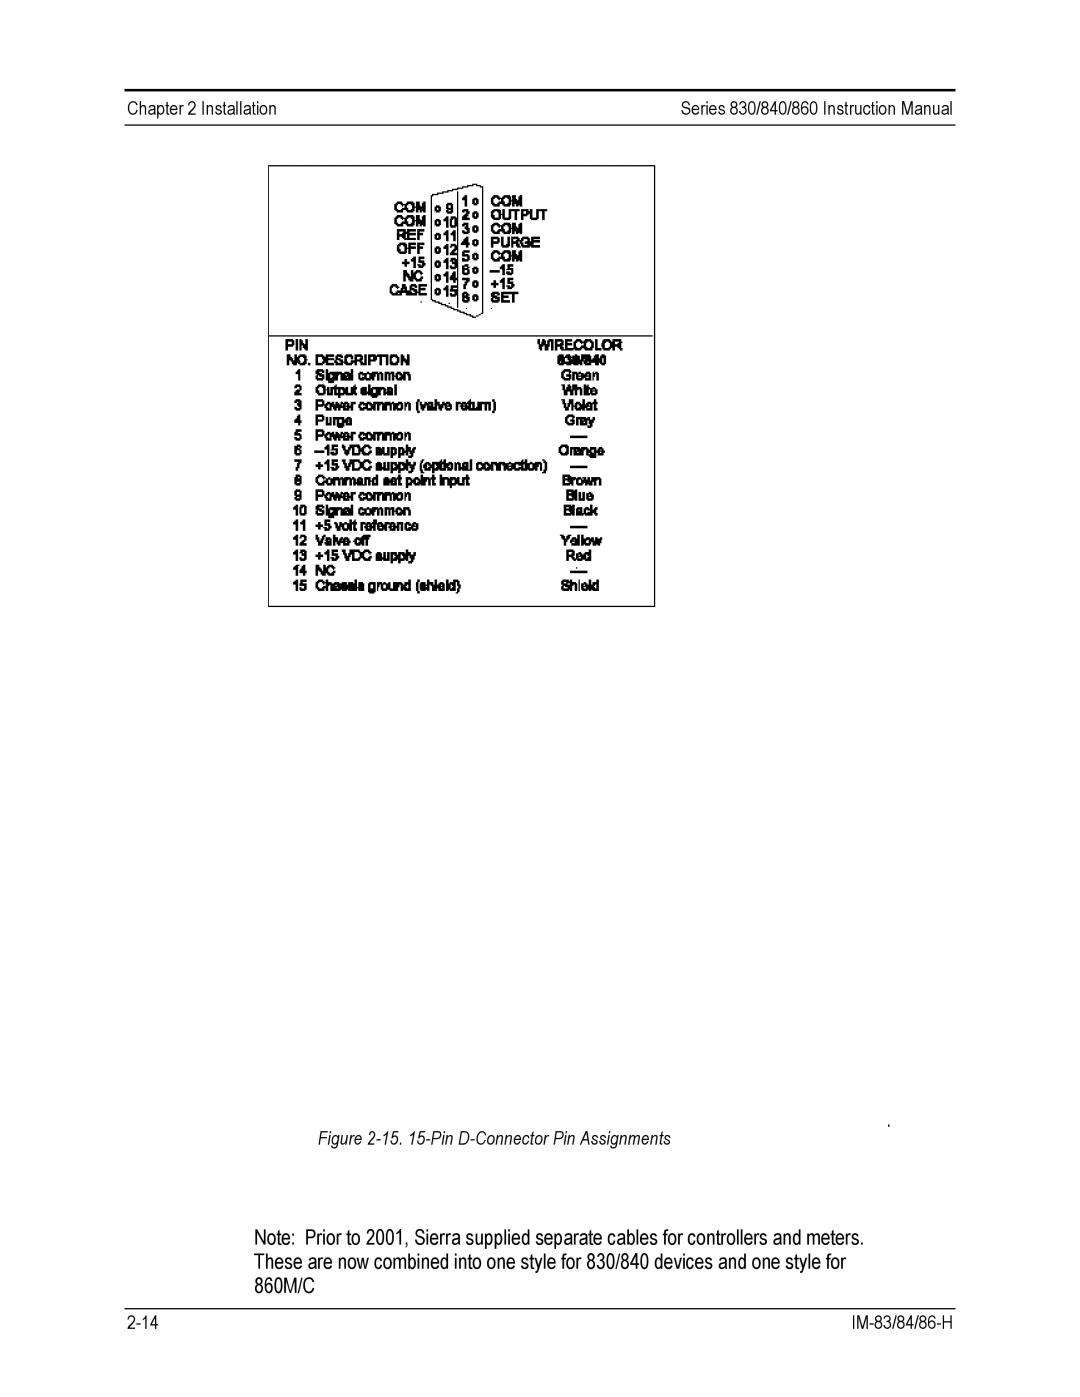 Sierra 830, 860, 840 instruction manual Pin D-Connector Pin Assignments 